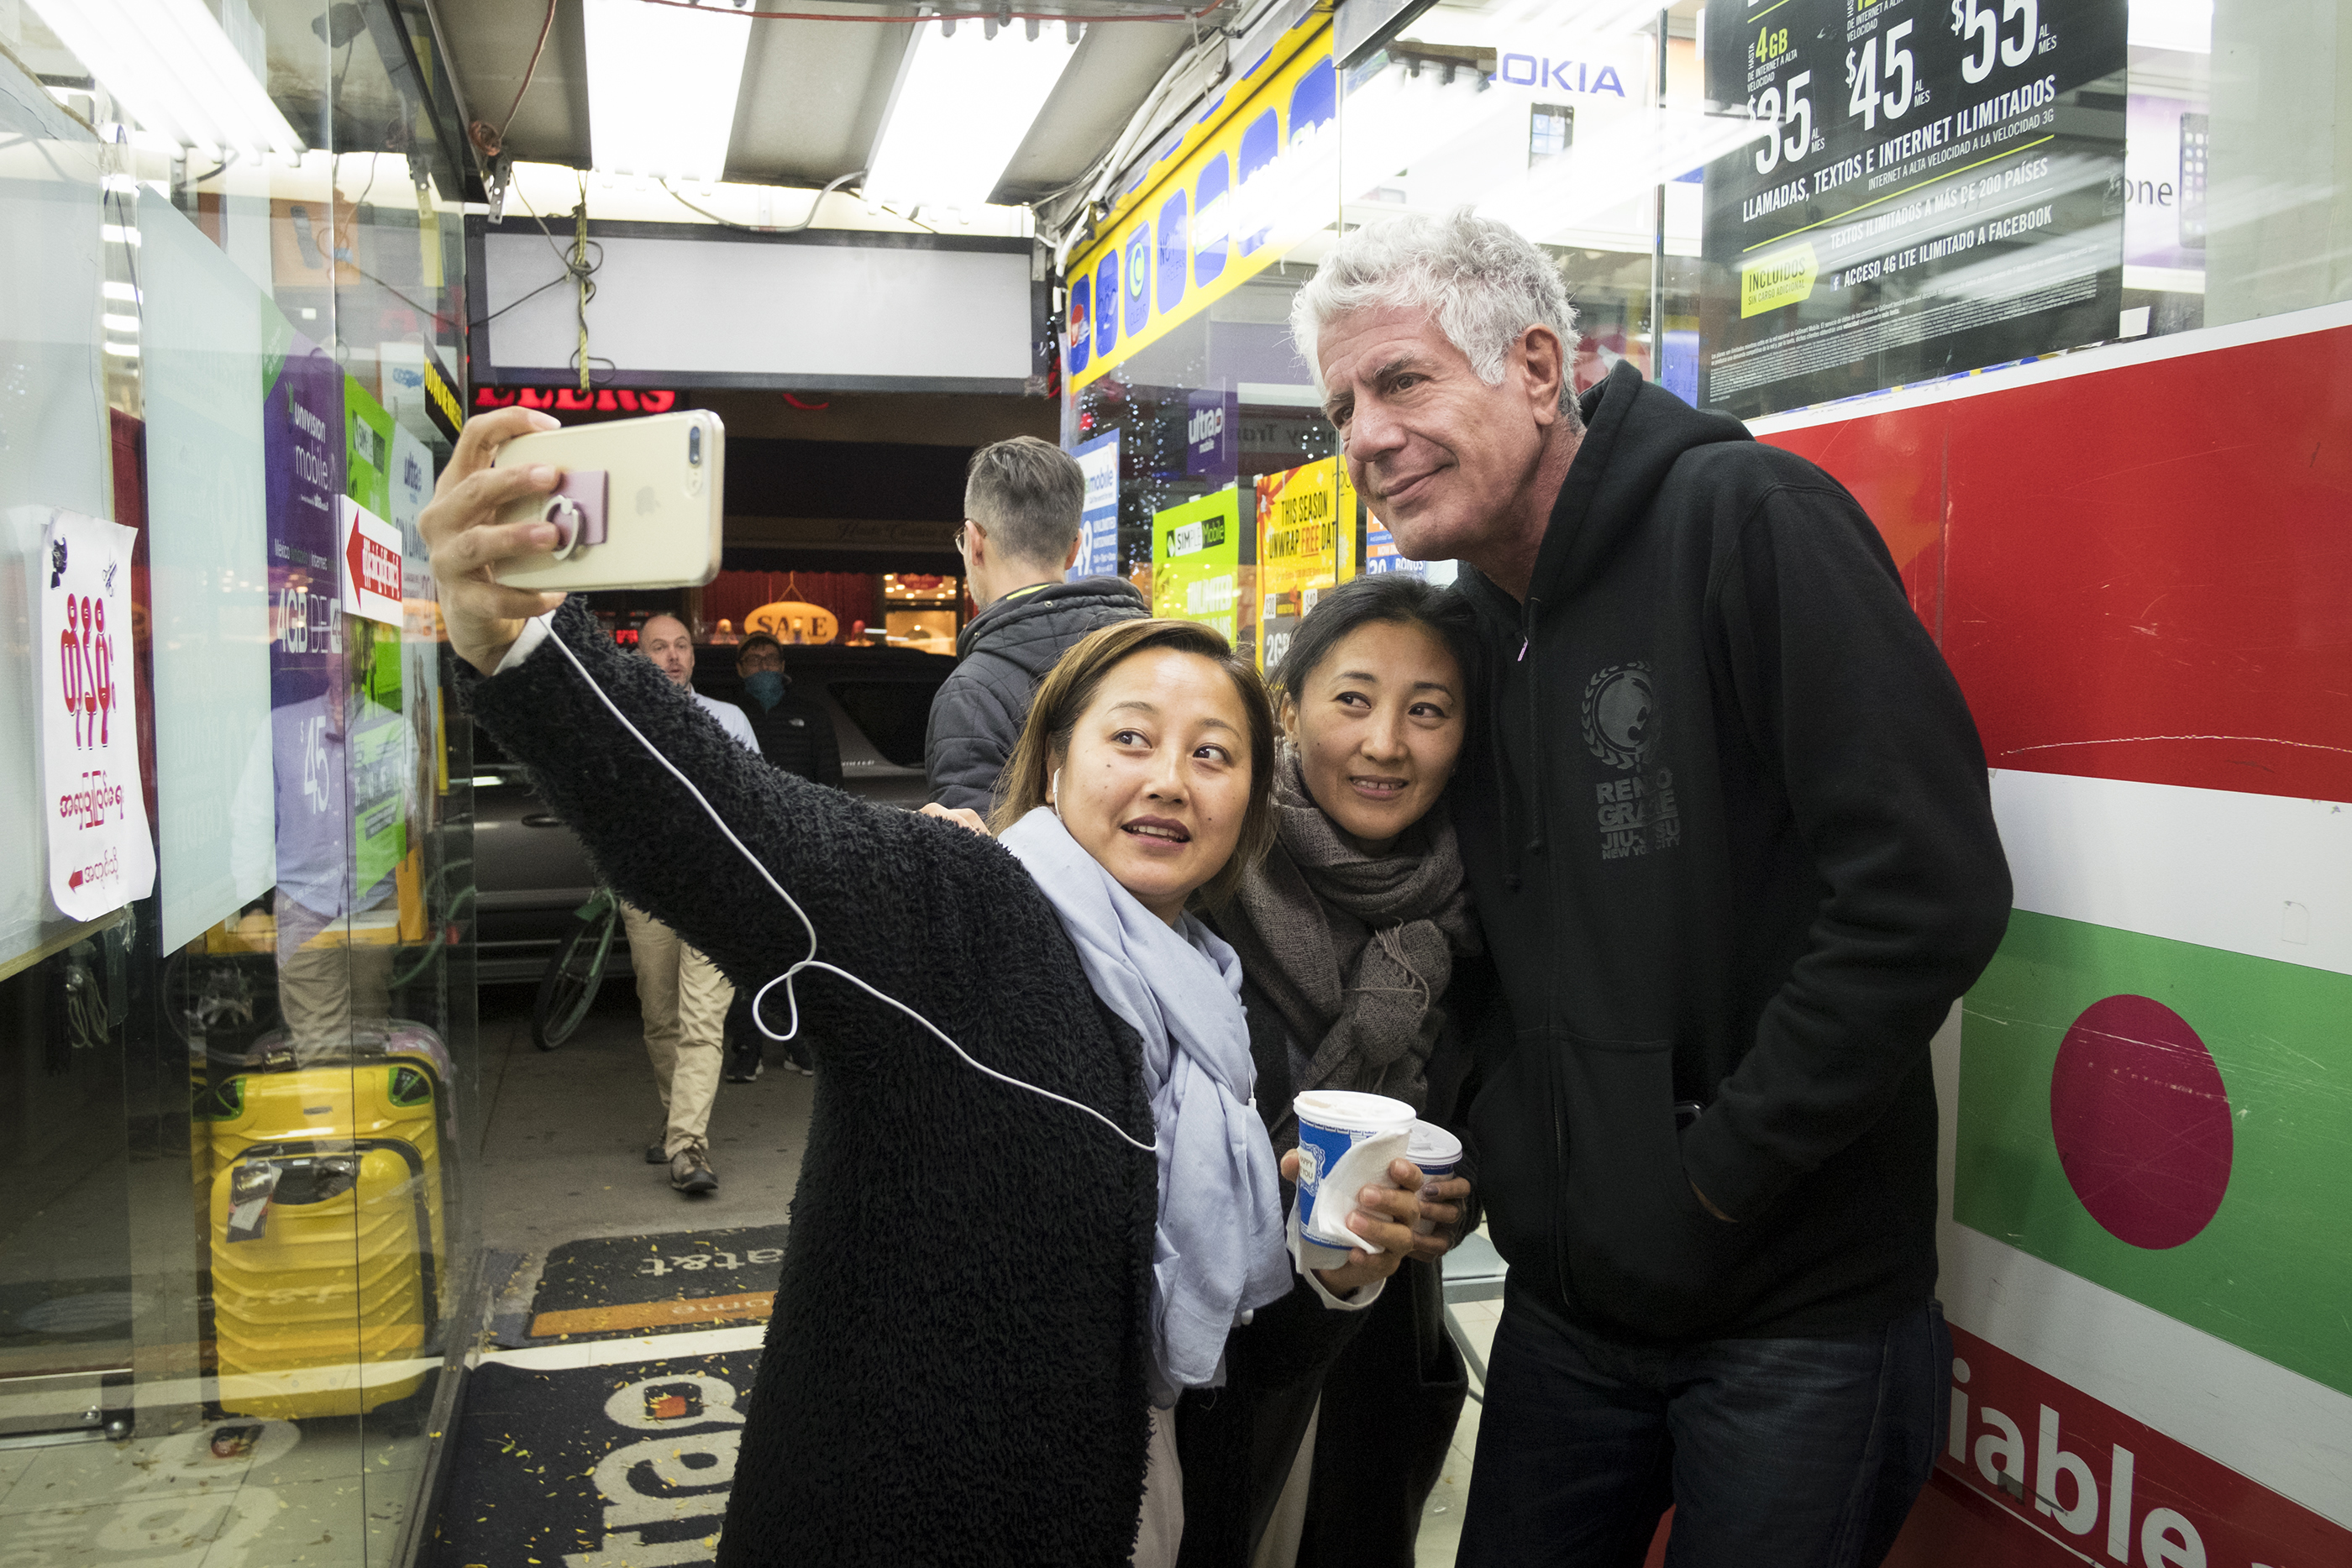 This is How Anthony Bourdain REALLY Feels About Instagram Travel Photos